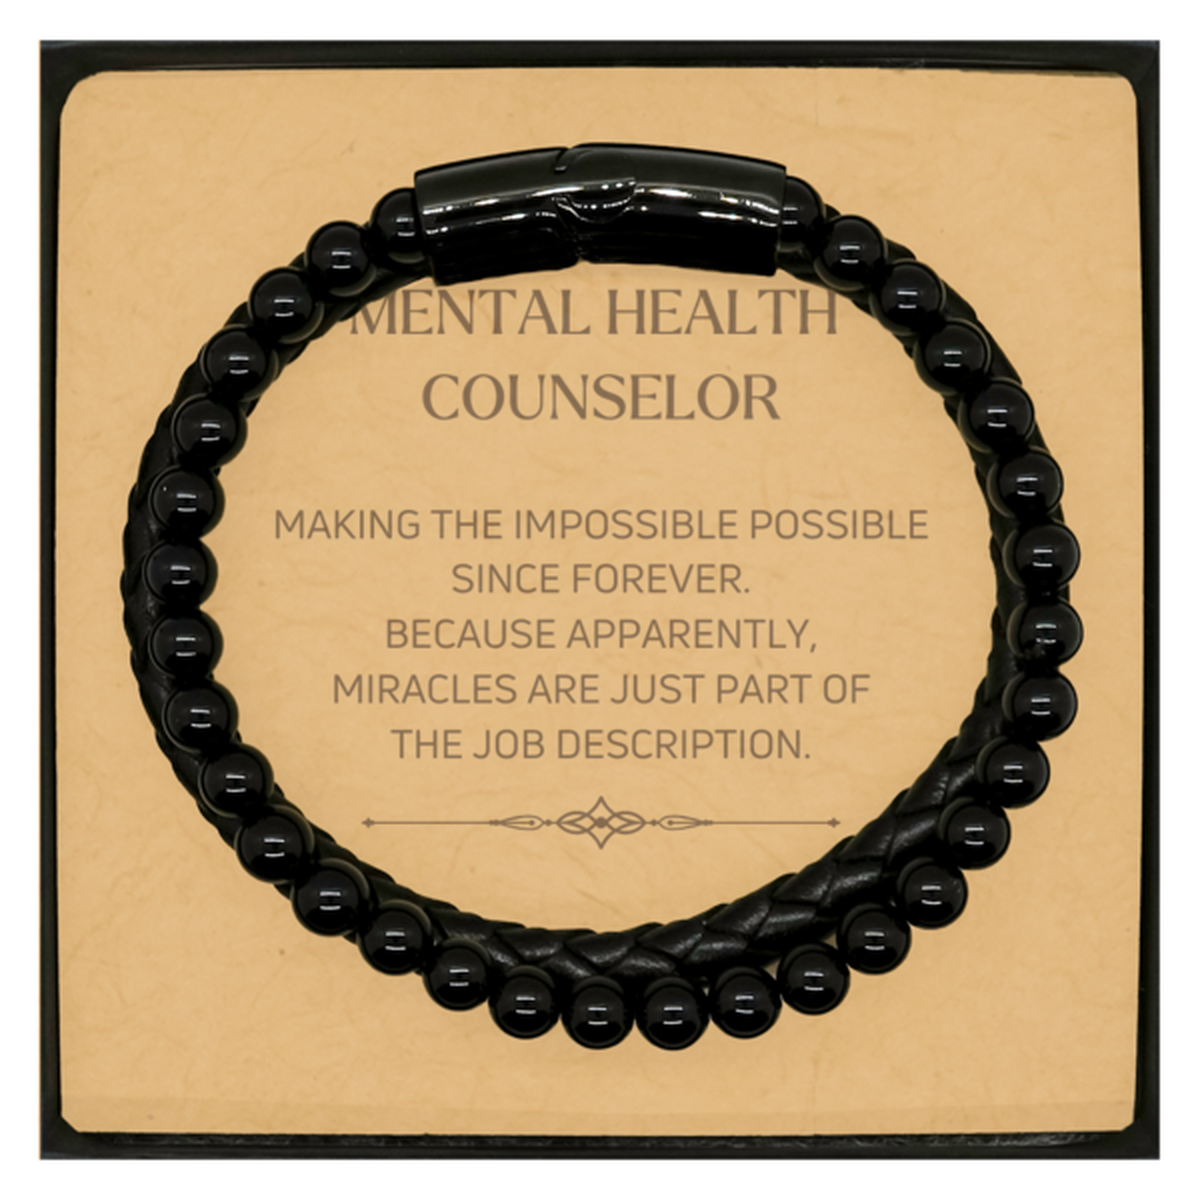 Funny Mental Health Counselor Gifts, Miracles are just part of the job description, Inspirational Birthday Christmas Stone Leather Bracelets For Mental Health Counselor, Men, Women, Coworkers, Friends, Boss